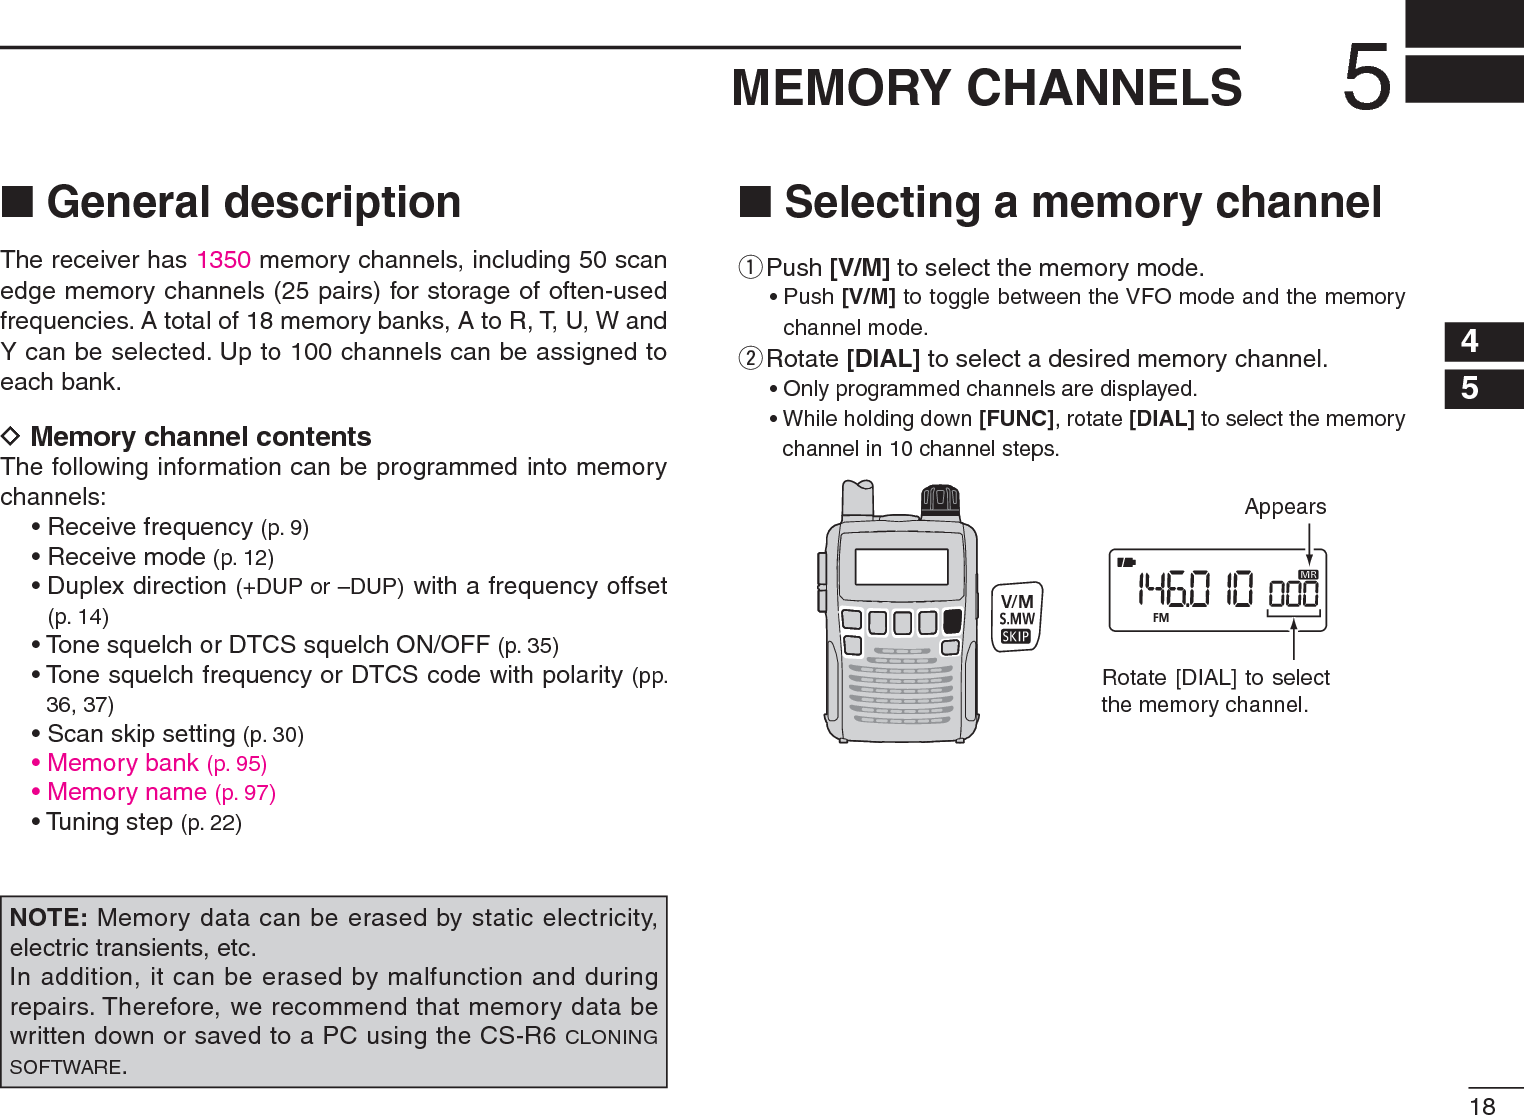 185MEMORY CHANNELS45N General descriptionThe receiver has 1350 memory channels, including 50 scan edge memory channels (25 pairs) for storage of often-used frequencies. A total of 18 memory banks, A to R, T, U, W and Y can be selected. Up to 100 channels can be assigned to each bank.D Memory channel contentsThe following information can be programmed into memory channels:• Receive frequency (p. 9)• Receive mode (p. 12)• Duplex direction (+DUP or –DUP) with a frequency offset (p. 14)• Tone squelch or DTCS squelch ON/OFF (p. 35)• Tone squelch frequency or DTCS code with polarity (pp. 36, 37)• Scan skip setting (p. 30)• Memory bank (p. 95)• Memory name (p. 97)• Tuning step (p. 22)N Selecting a memory channelq  Push [V/M] to select the memory mode.• Push [V/M] to toggle between the VFO mode and the memory channel mode.w  Rotate [DIAL] to select a desired memory channel.• Only programmed channels are displayed.• While holding down [FUNC], rotate [DIAL] to select the memory channel in 10 channel steps.AppearsRotate [DIAL] to selectthe memory channel.NOTE: Memory data can be erased by static electricity, electric transients, etc.In addition, it can be erased by malfunction and during repairs. Therefore, we recommend that memory data be written down or saved to a PC using the CS-R6 CLONINGSOFTWARE.